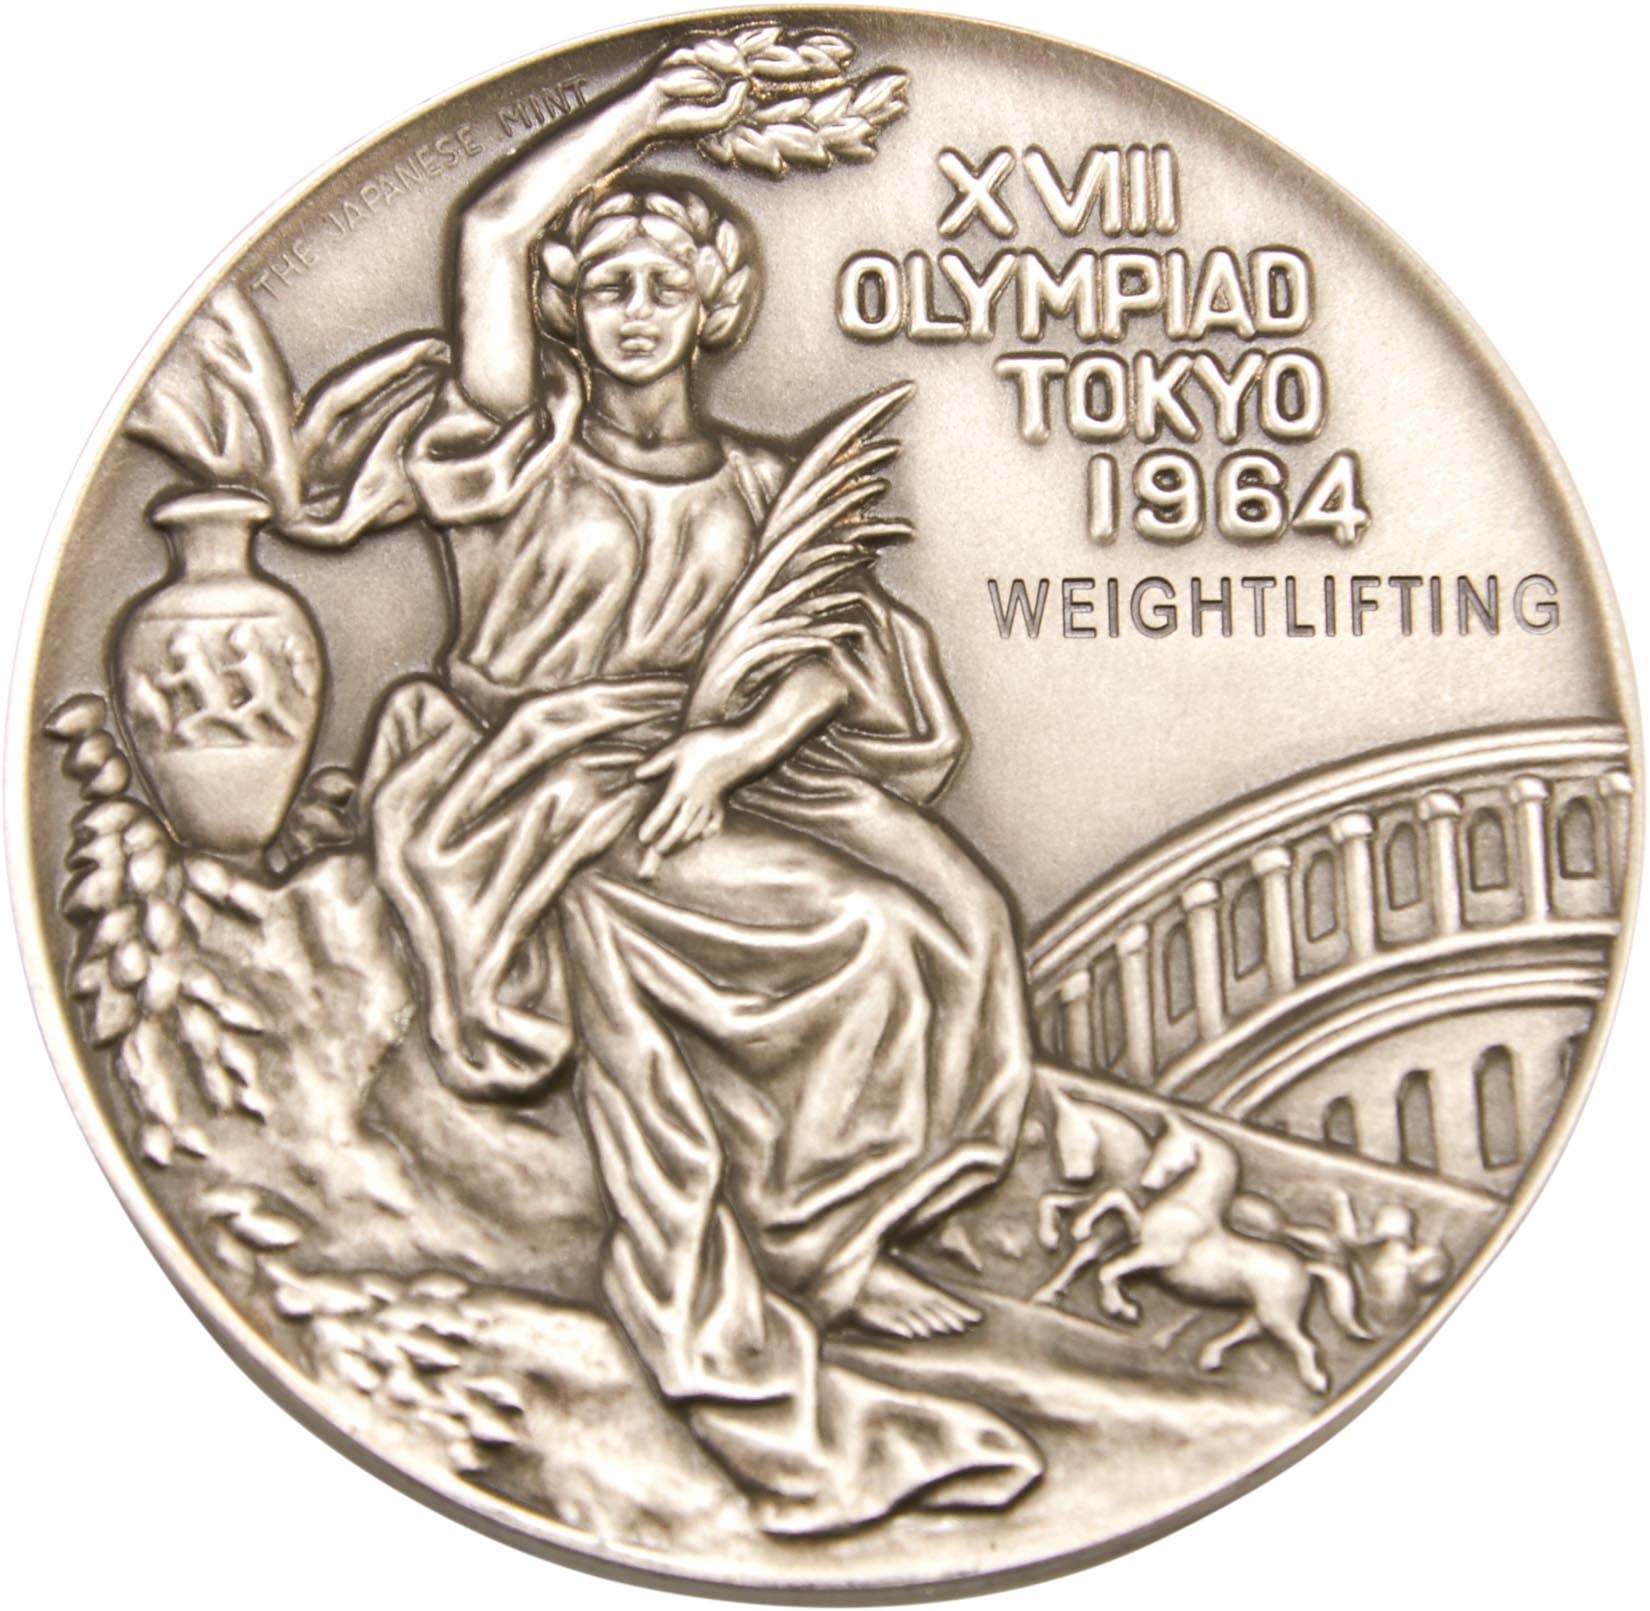 - 1964 Tokyo Olympics Weightlifting Silver Medal Awarded to "World's Strongest Man"